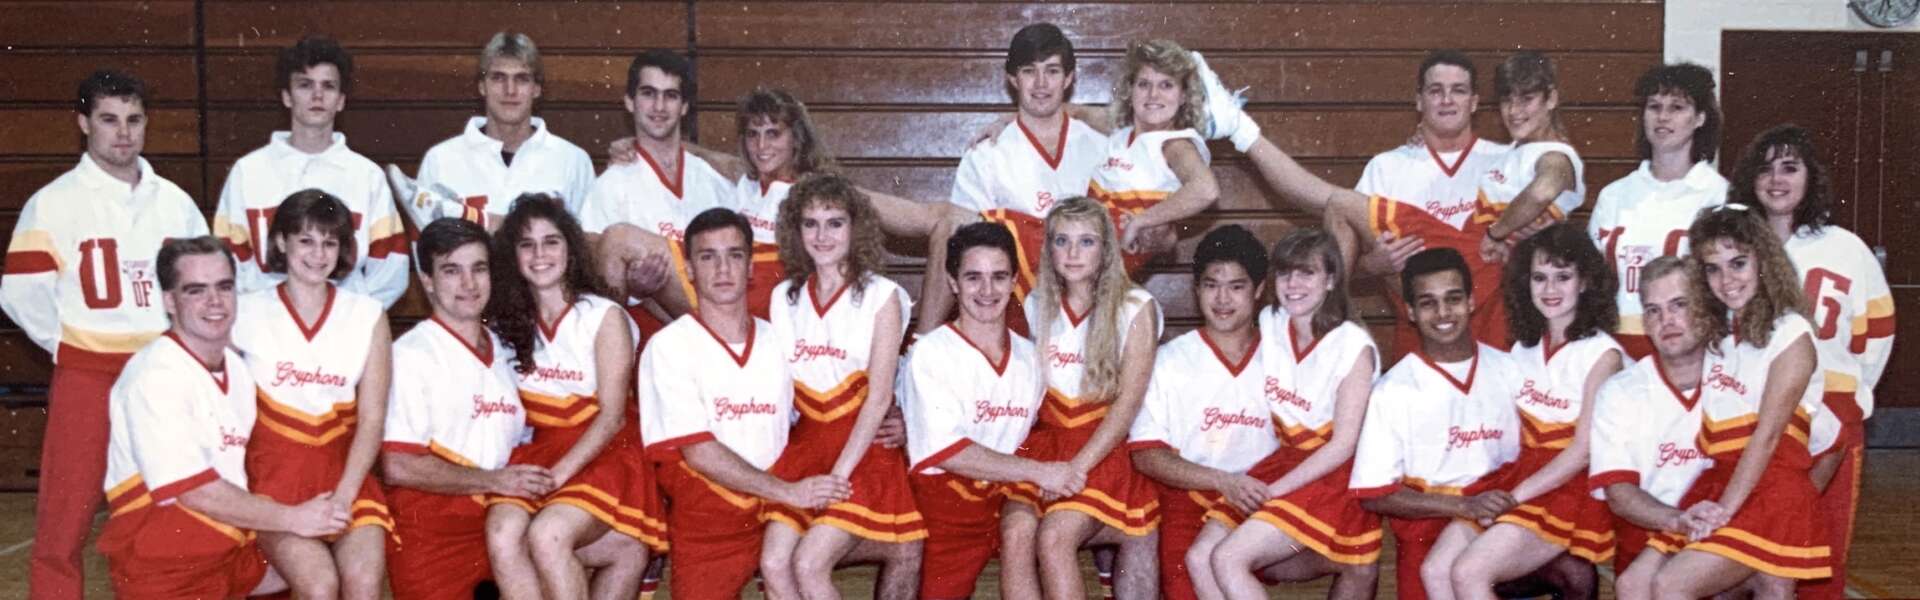 A group of 25 students in cheerleader uniforms pose for a portrait in a university gym